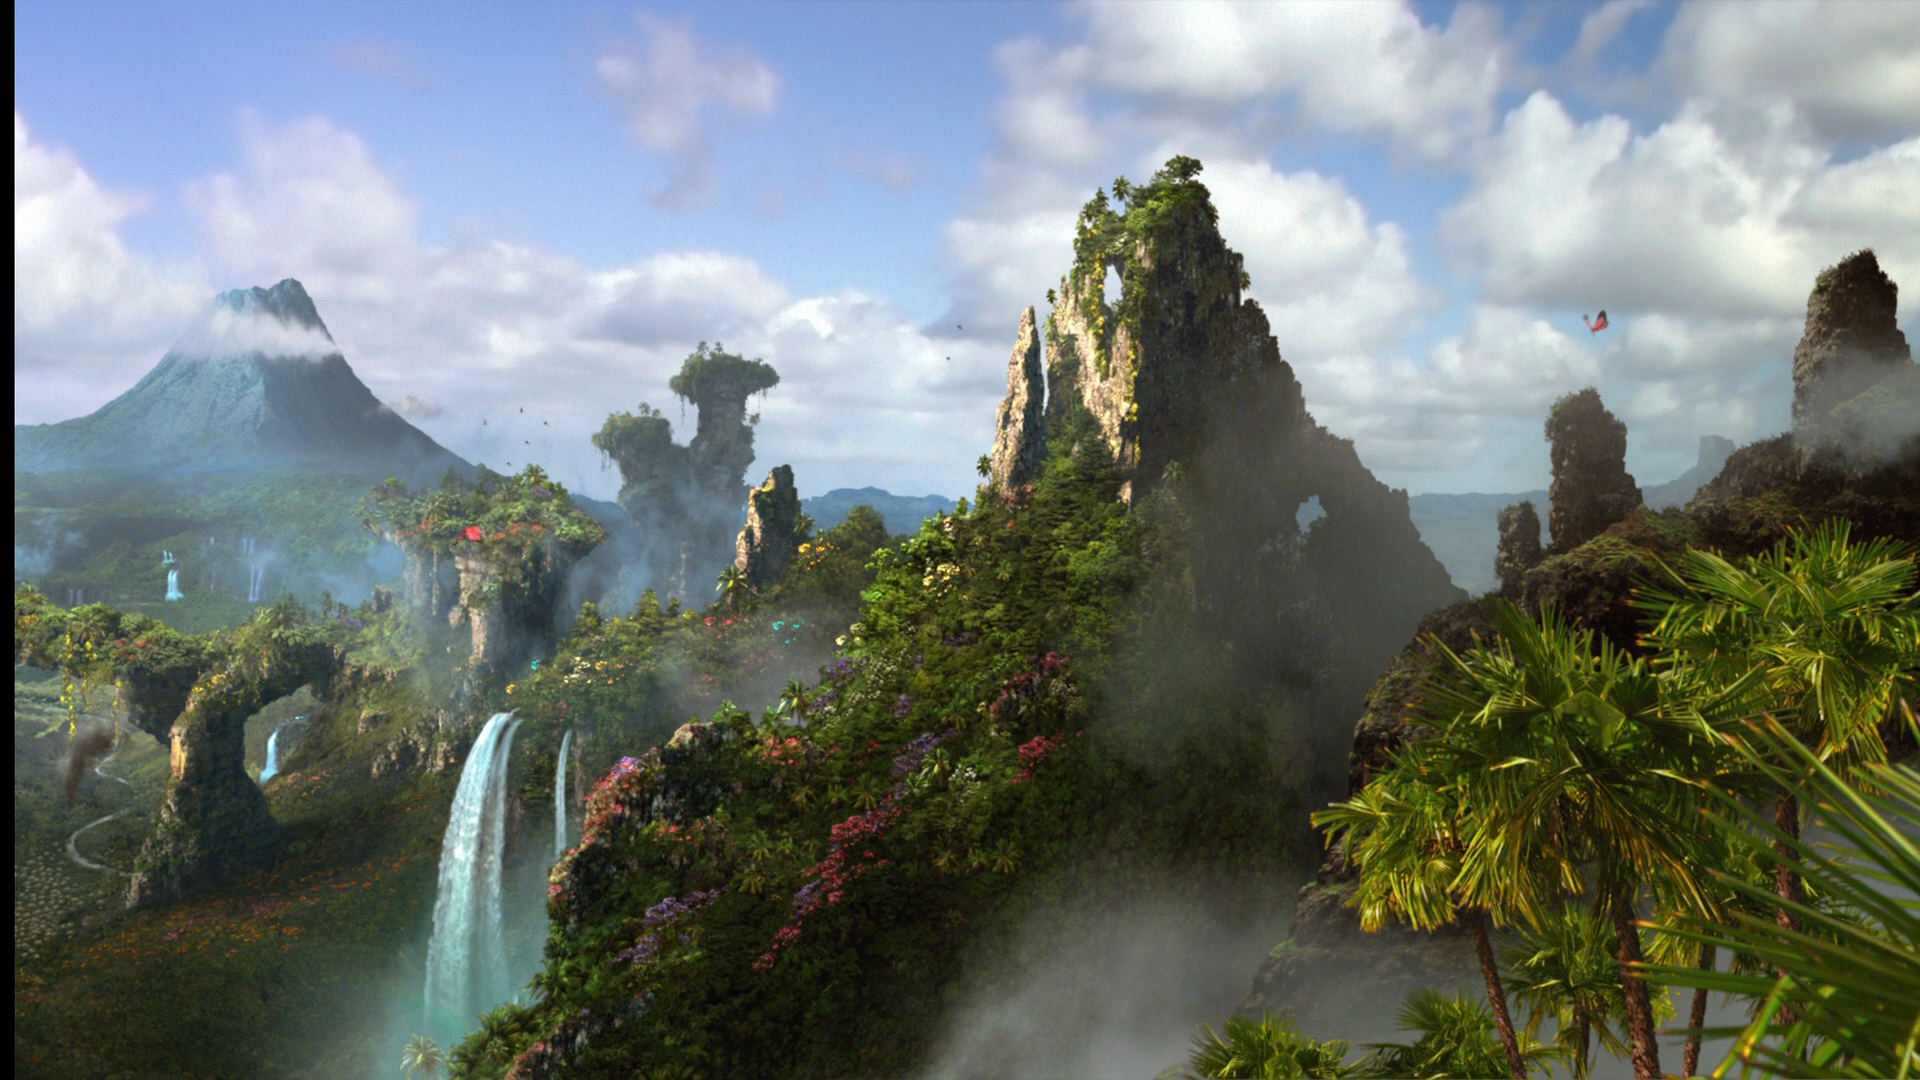 Journey 2: The Mysterious Island Wallpapers